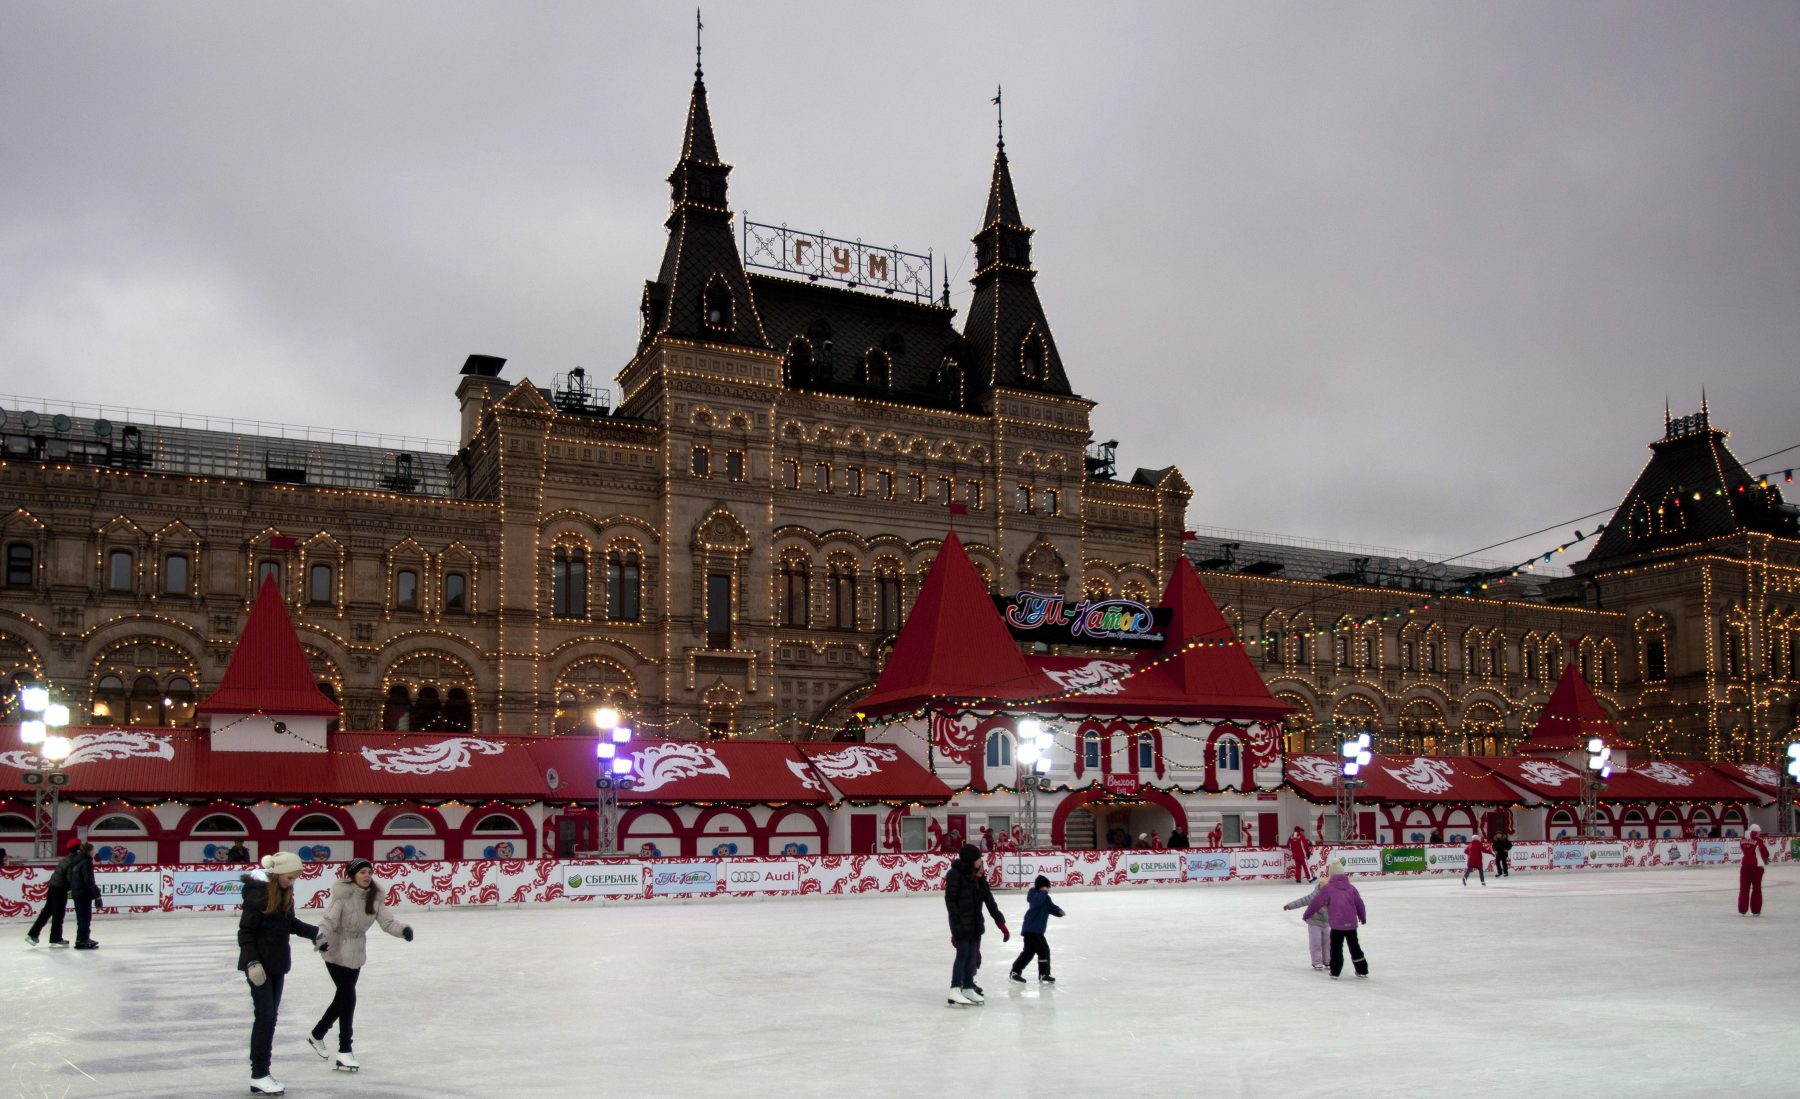 People skate on the ice rink opened on Red Square, with the building of the State Department Store in the background in Moscow, Russia, Saturday, Dec. 3, 2011. (AP Photo/Misha Japaridze)